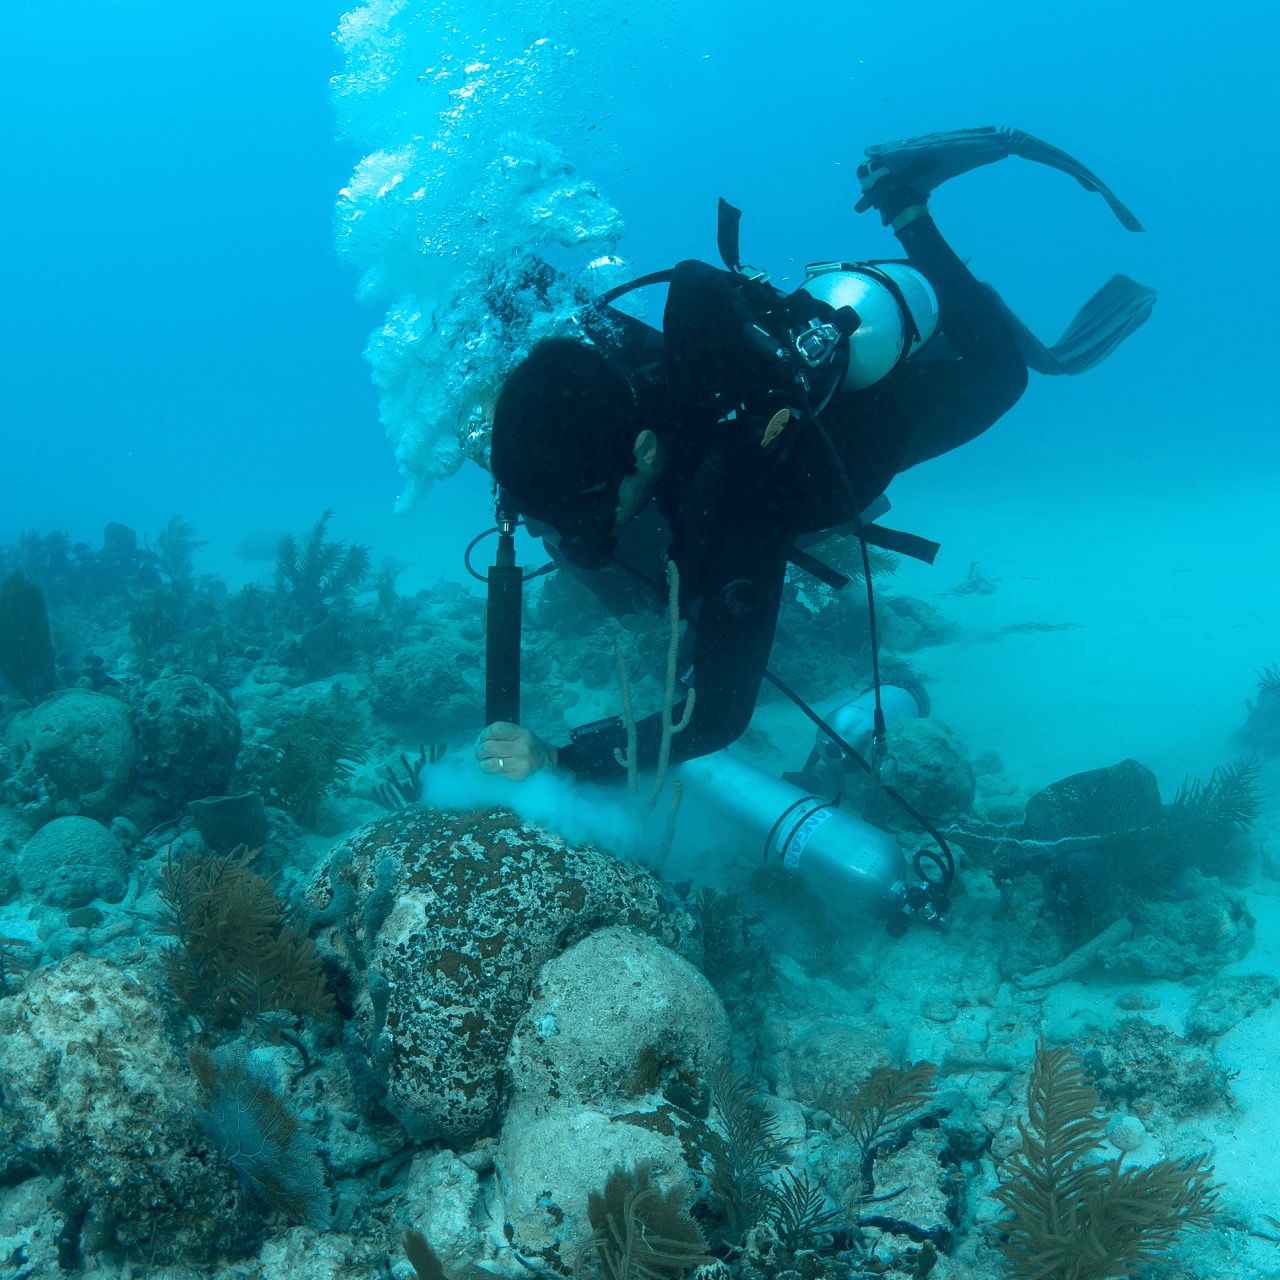 Collecting coral cores in the Florida Keys on Expedition 10. PC: Kevin Davidson